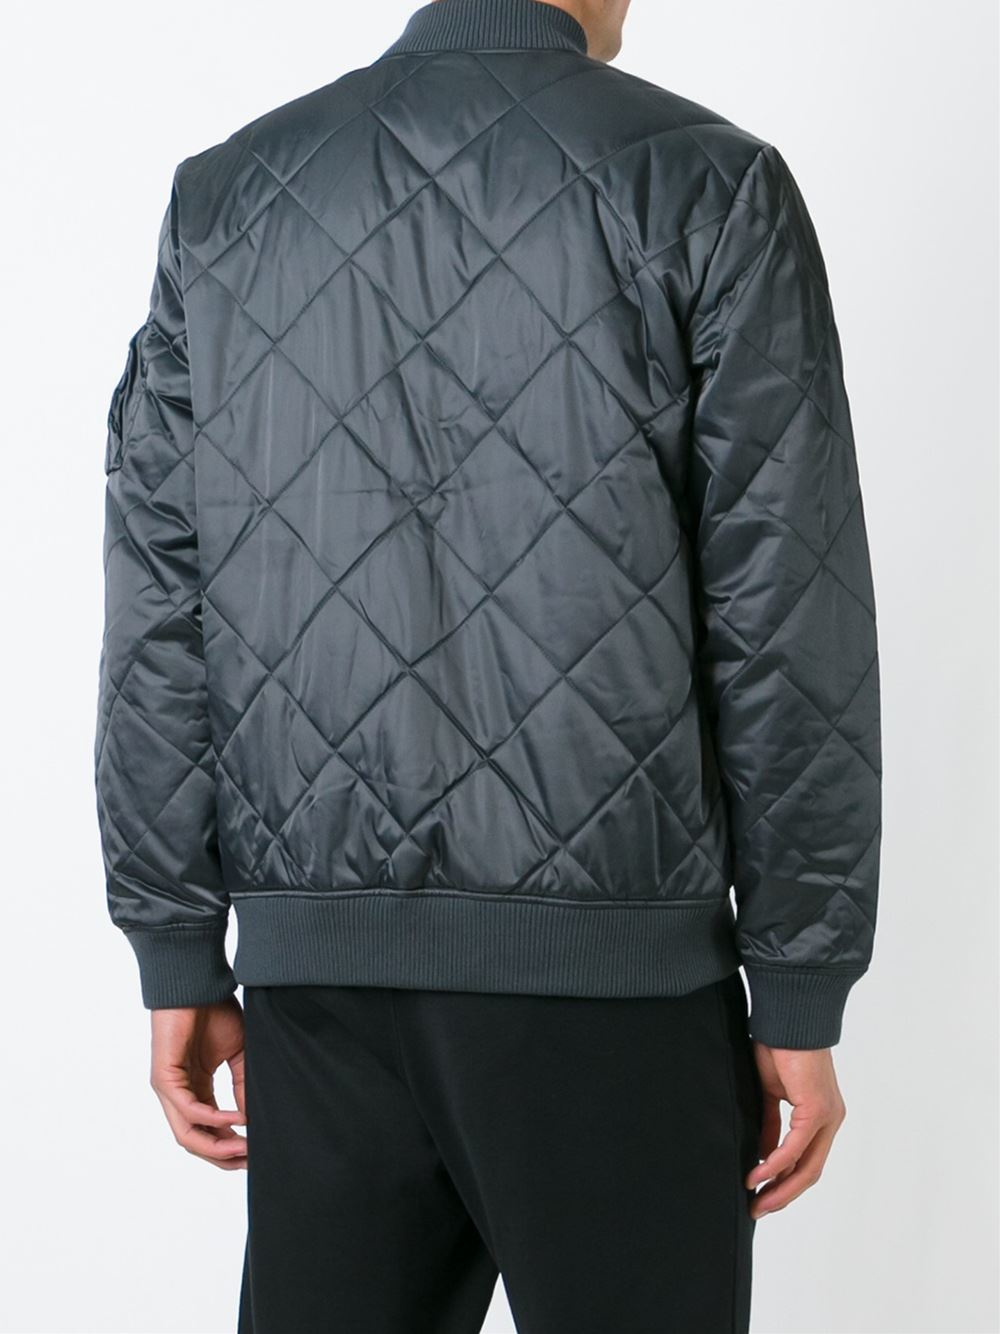 adidas Originals Quilted Bomber Jacket in Grey (Gray) for Men | Lyst